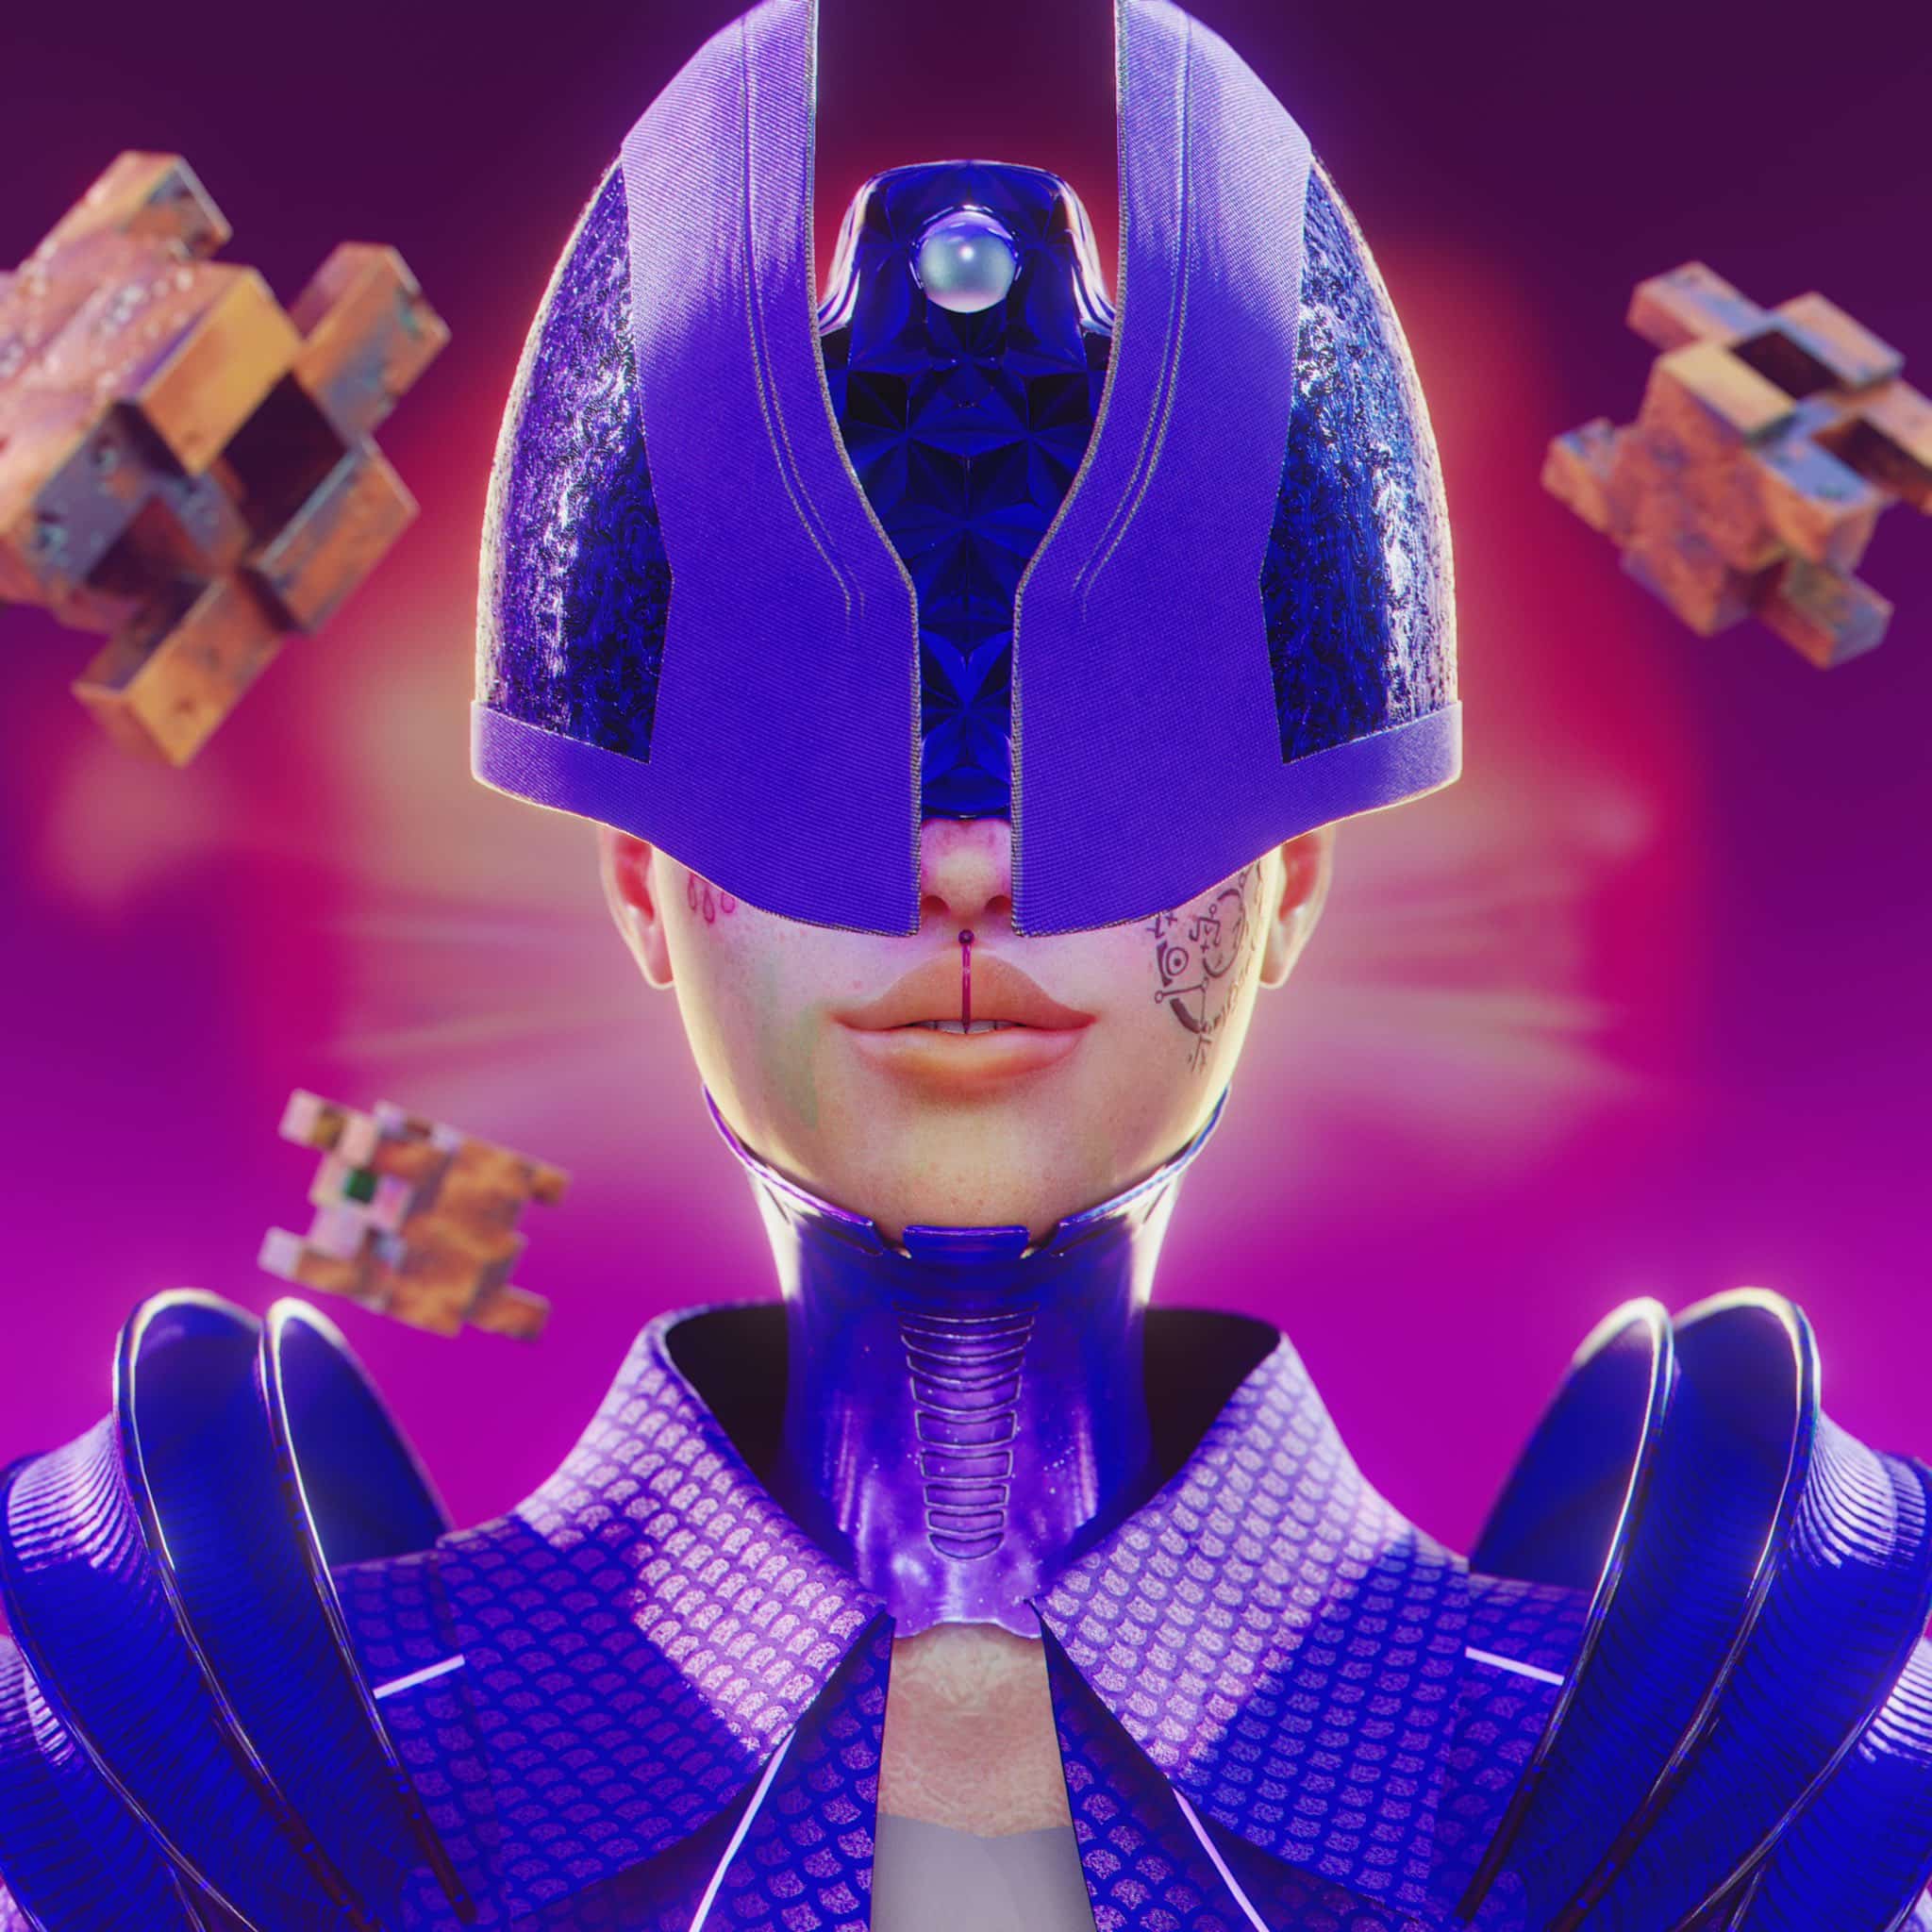 Image of futuristic robot woman in purple upcoming NFT mint